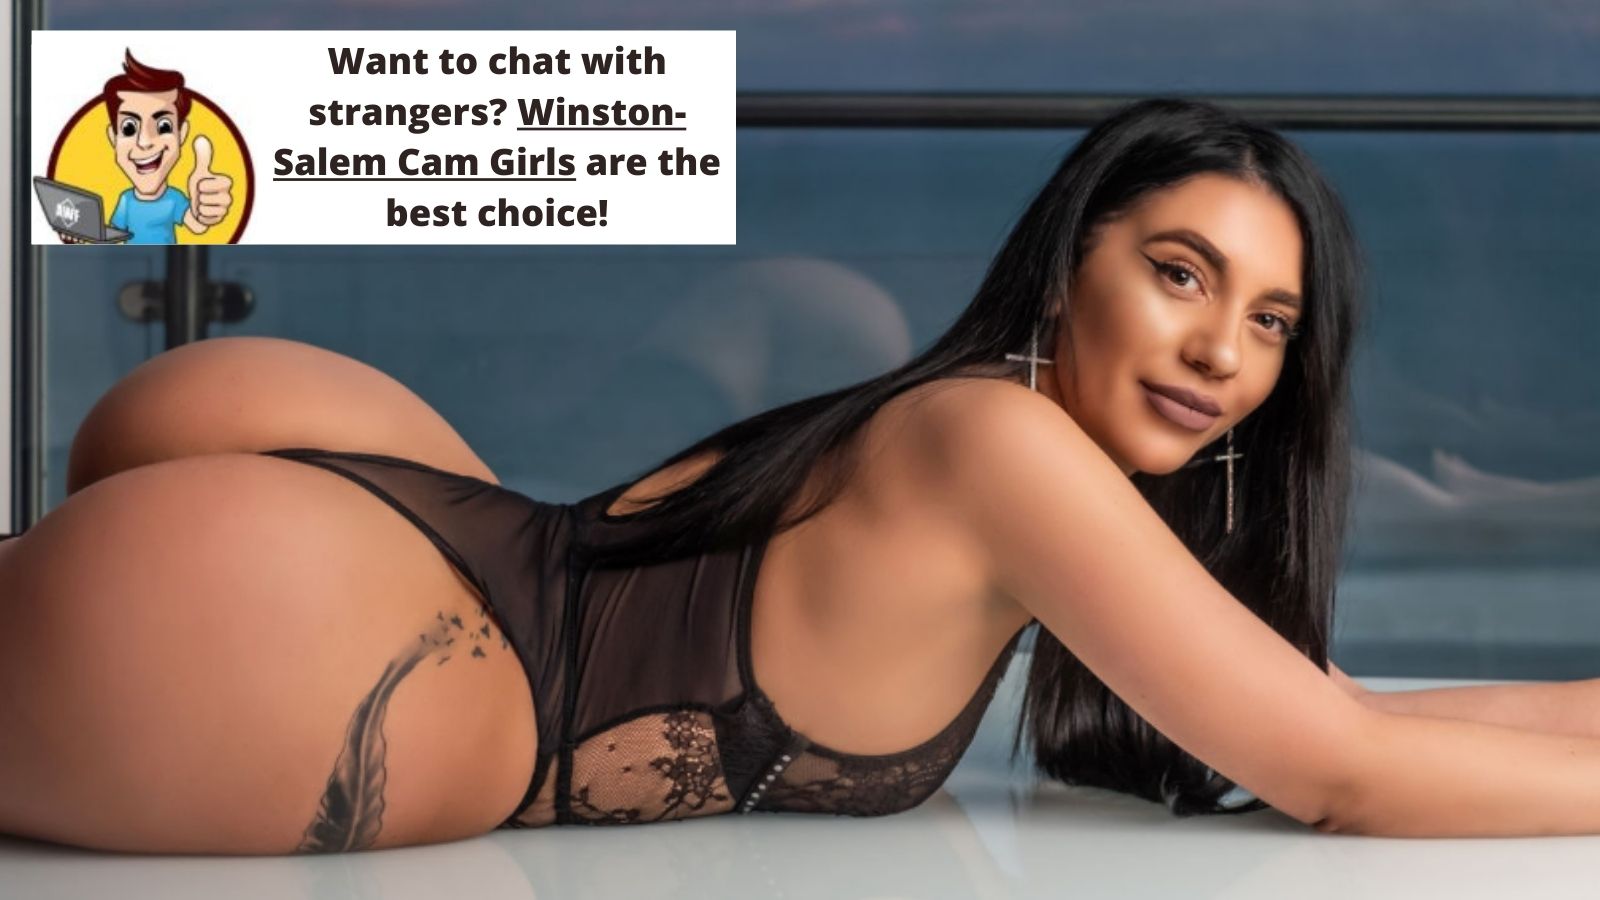 Winston-Salem Cam girls are one of the best cam girls to chat with new people!